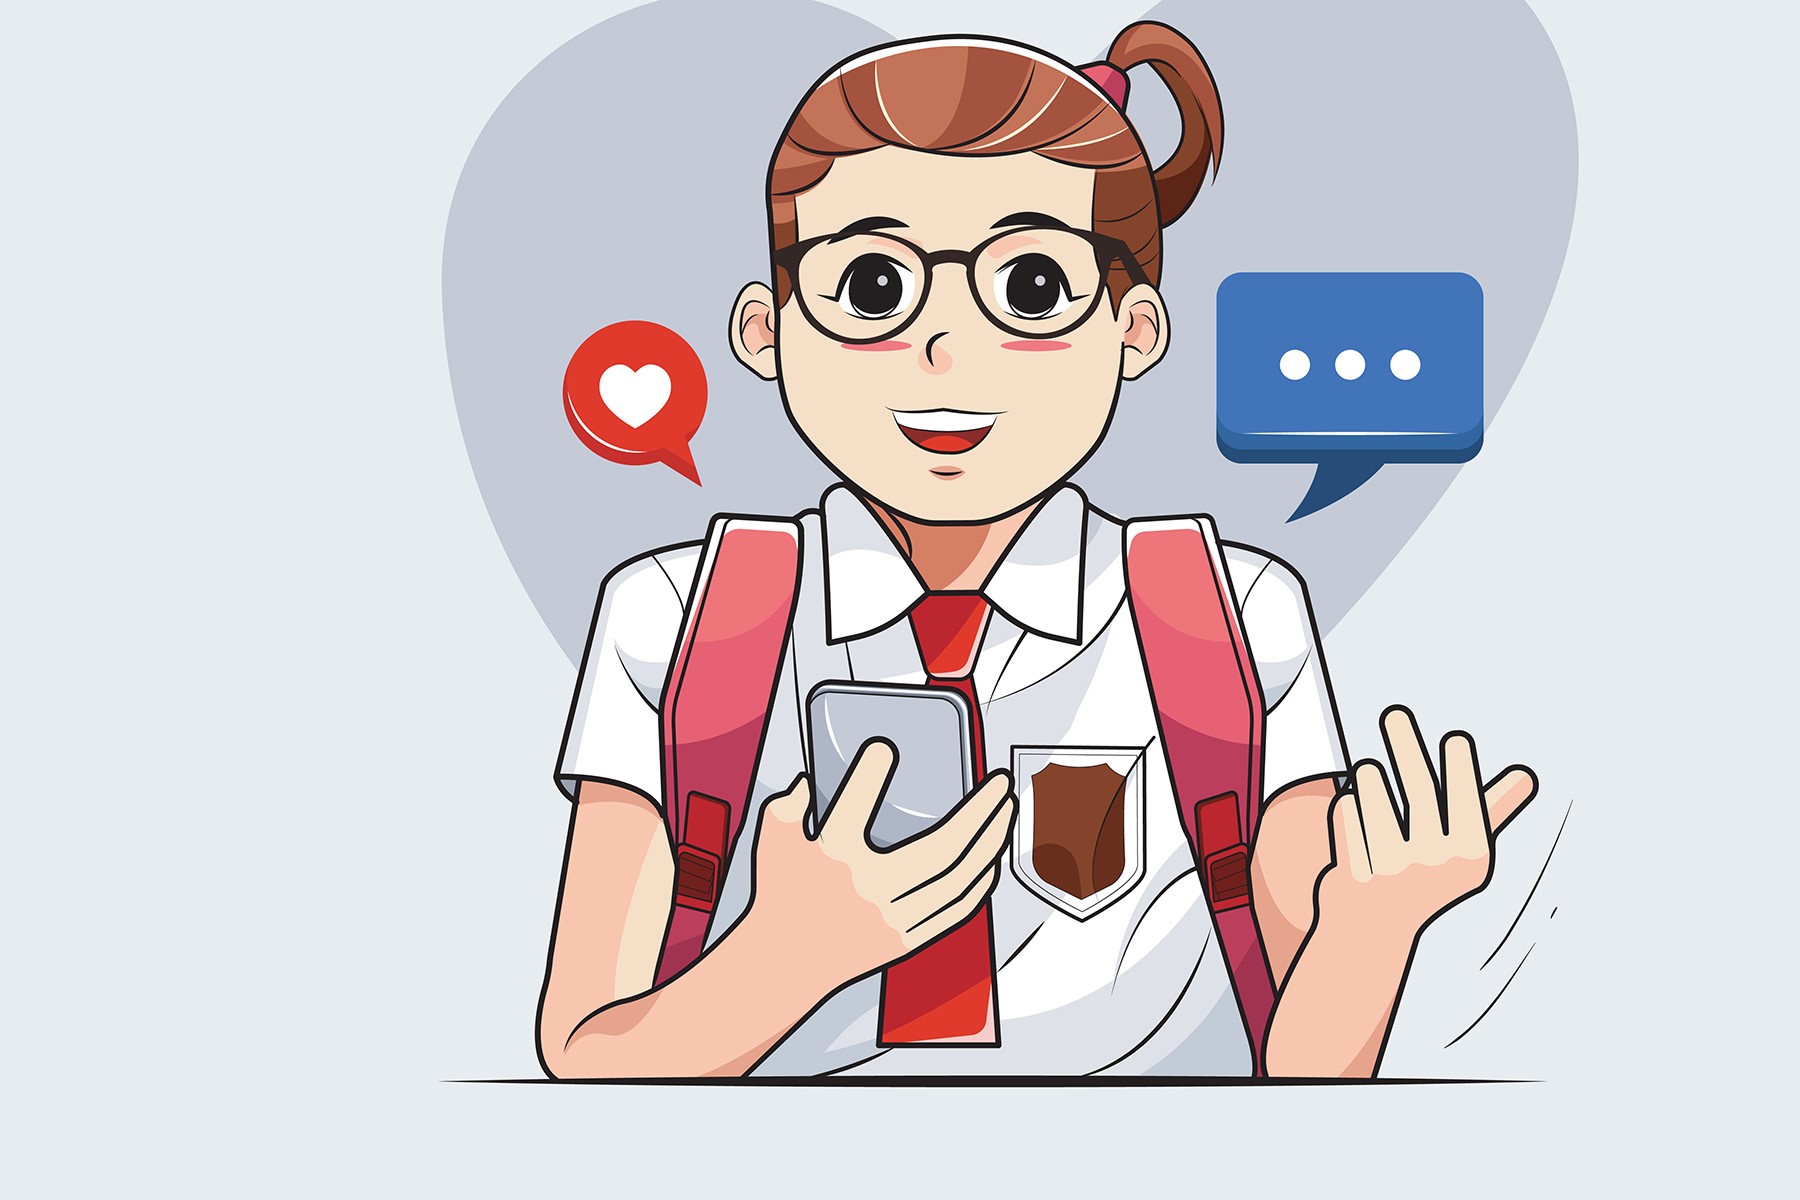 stock cartoon-style image of a schoolkid holding a smartphone